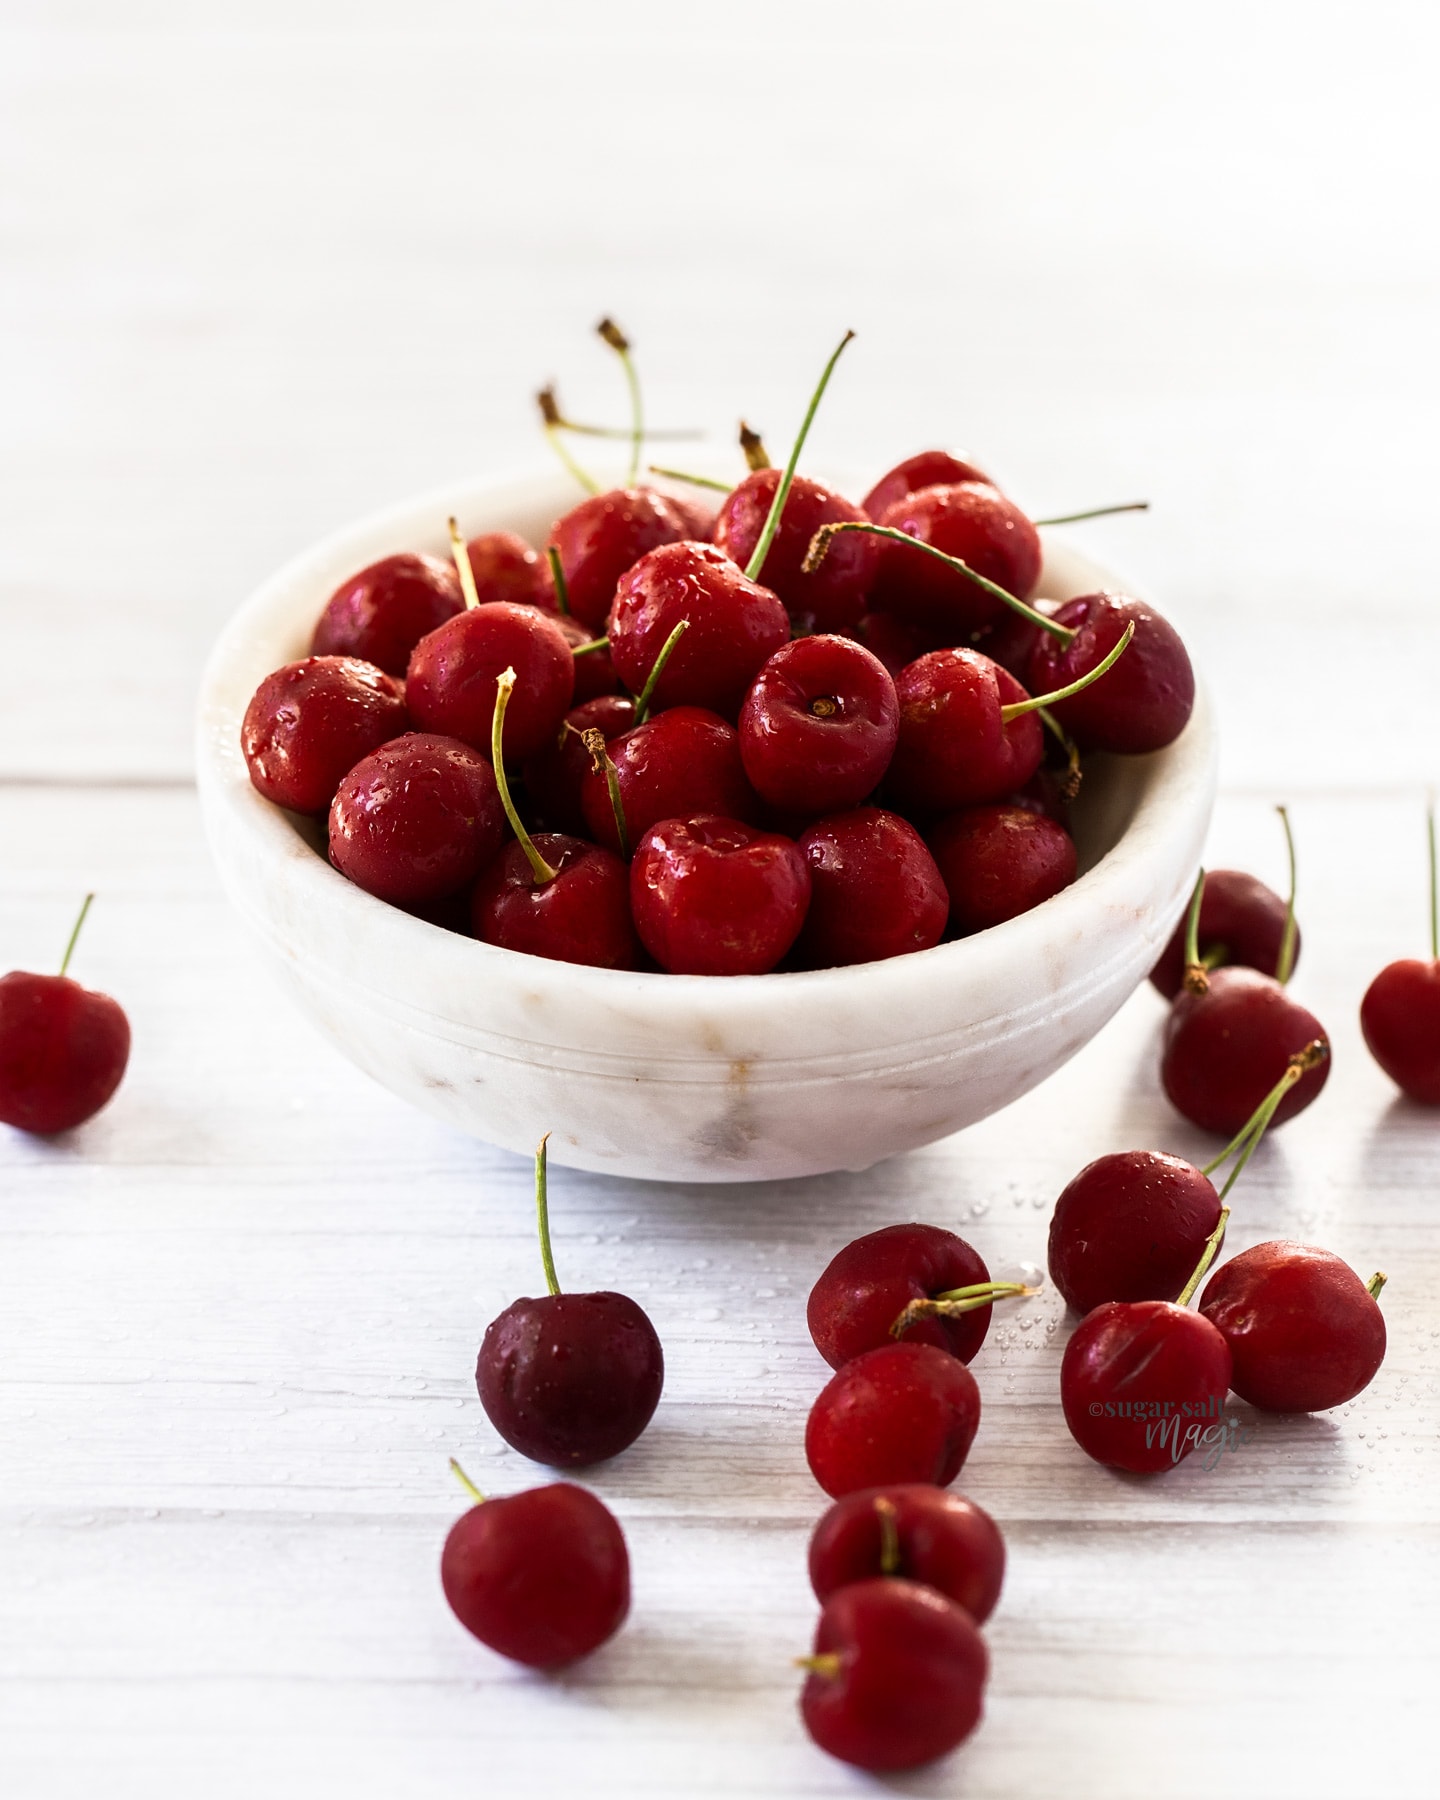 A white bowl filled with cherries